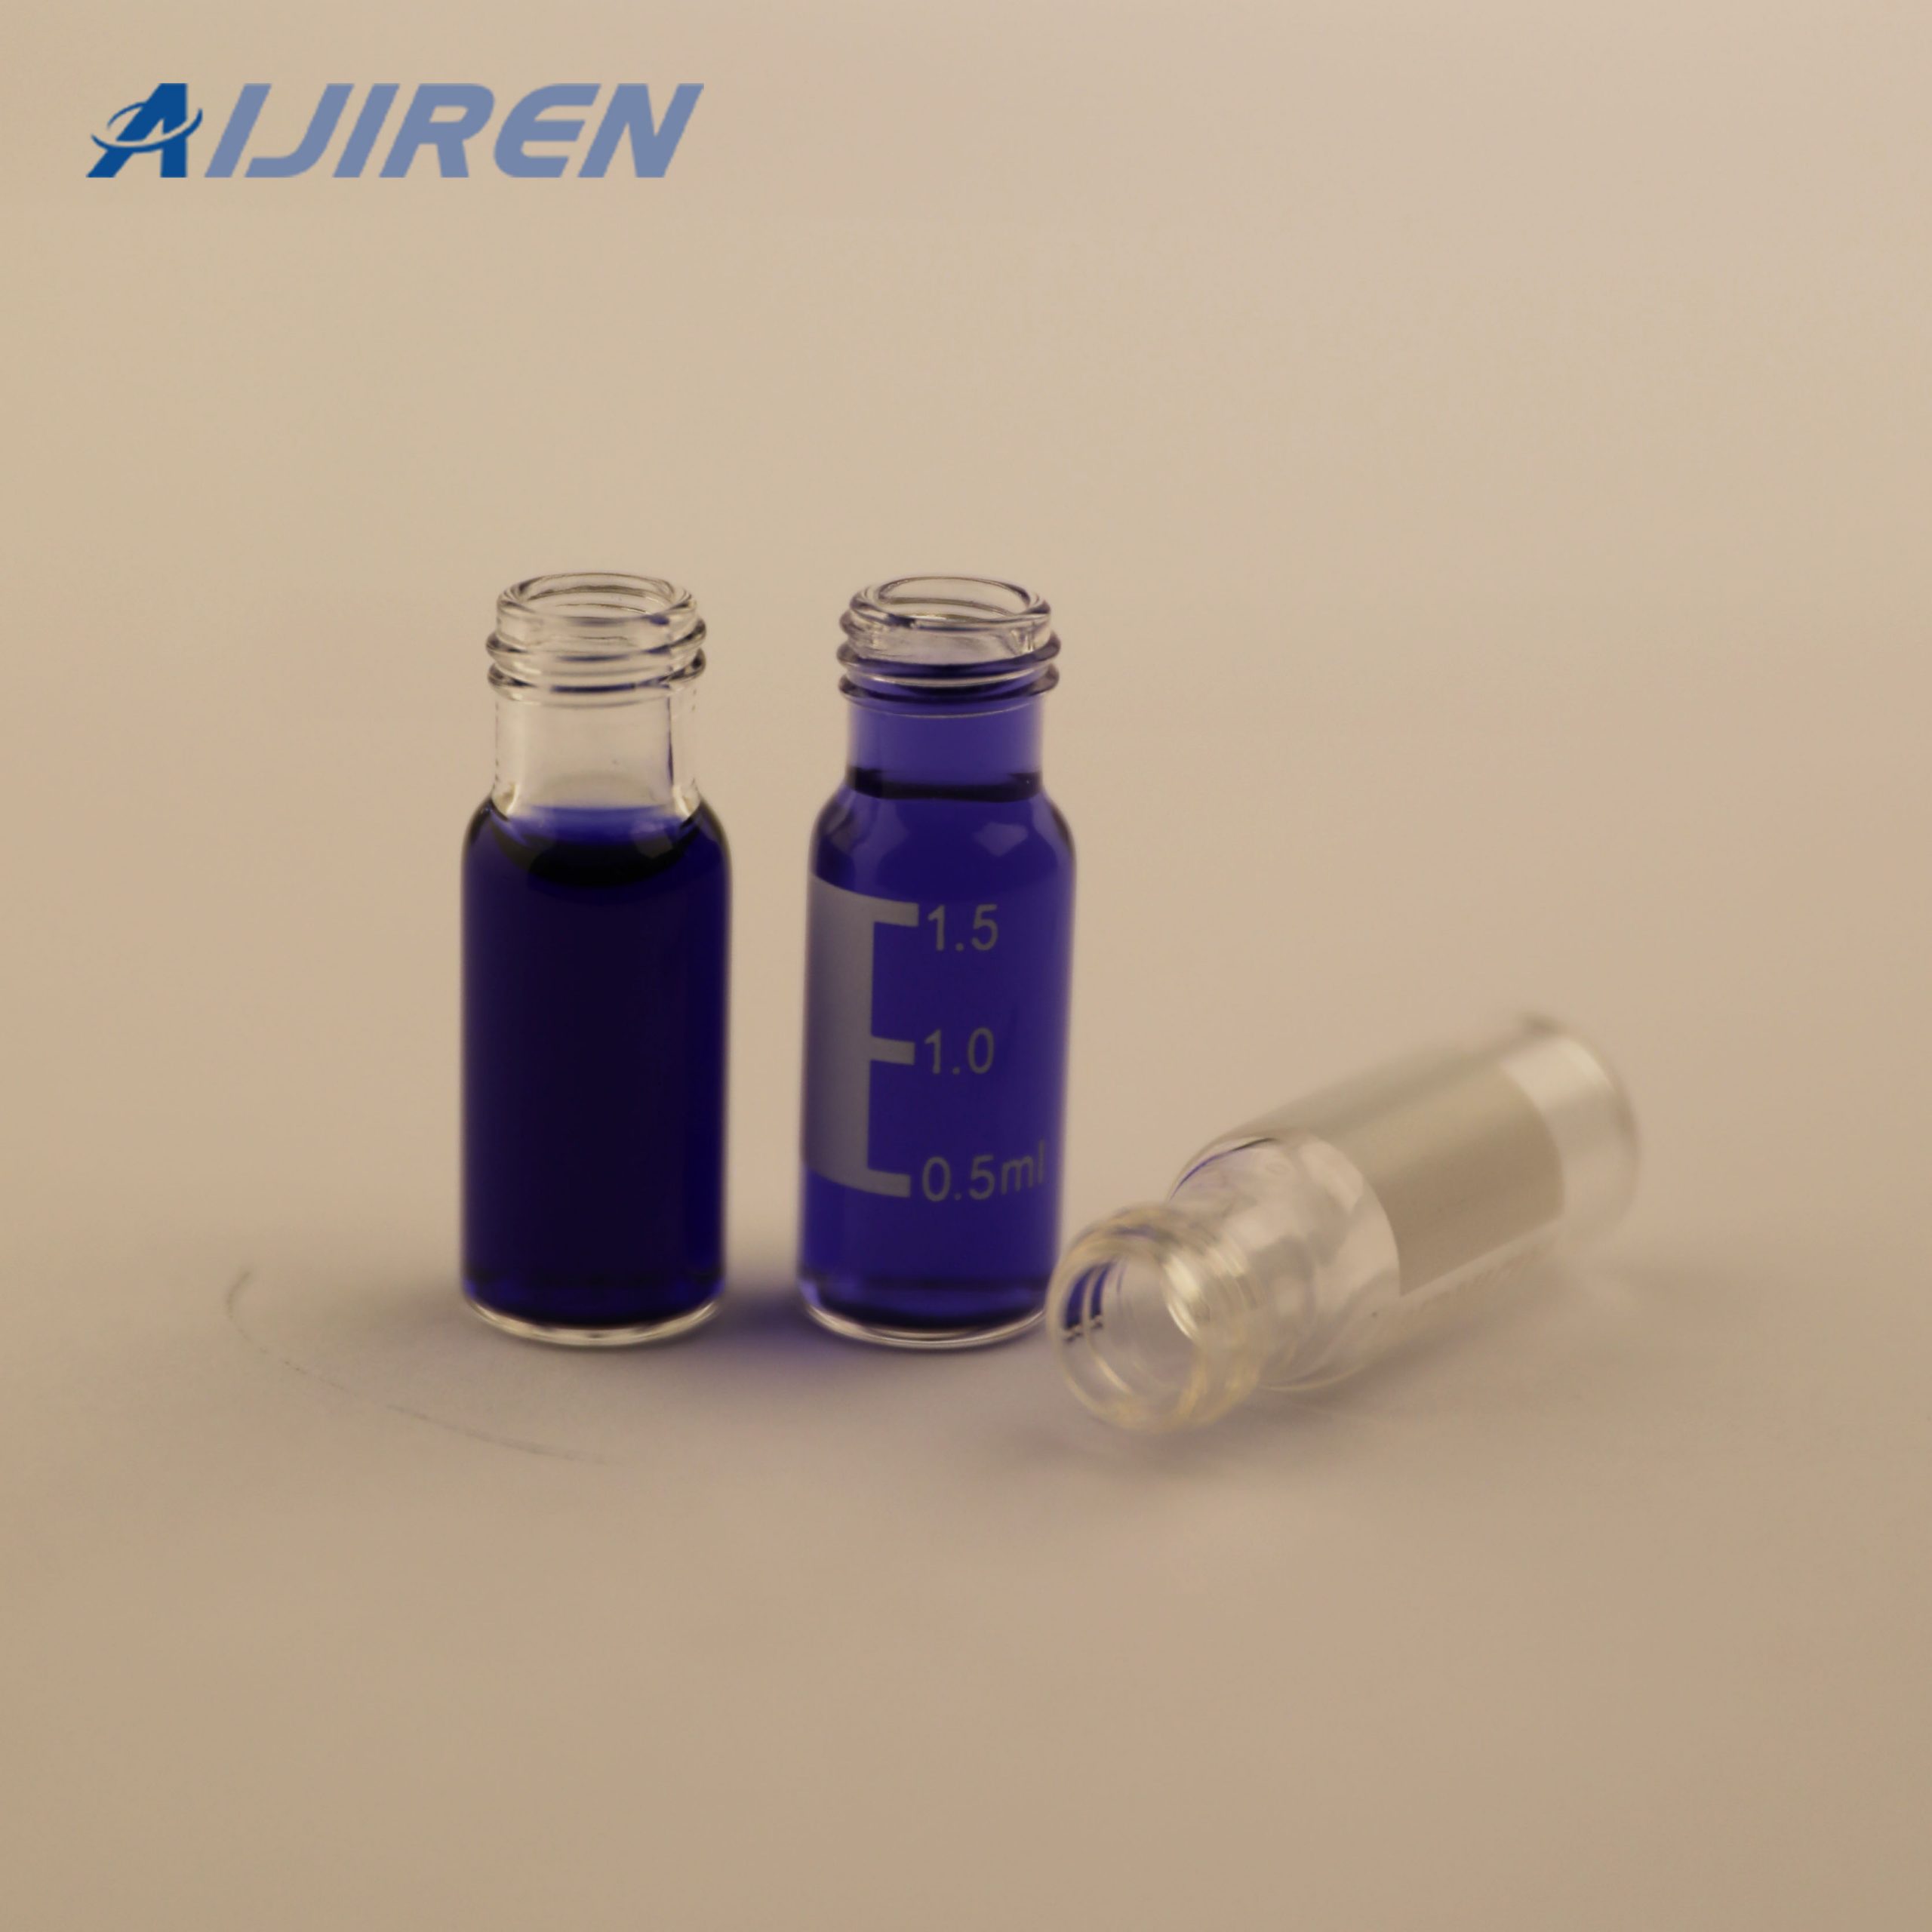 20ml headspace vial9mm Clear Glass Screw Top Vial for HPLC